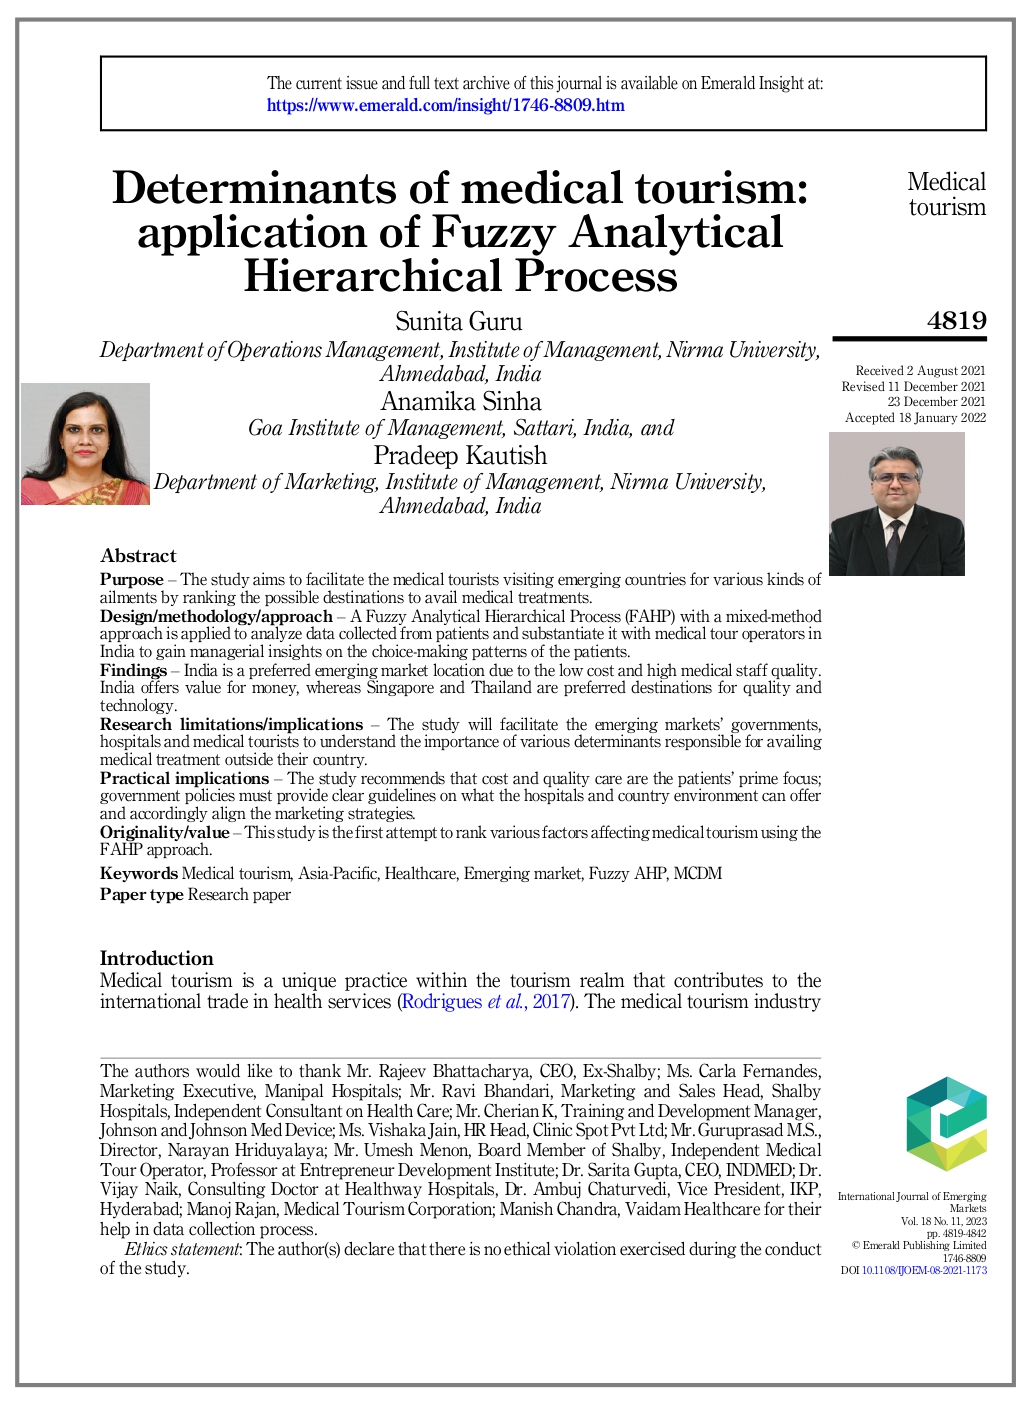 Determinants of medical tourism: application of Fuzzy Analytical Hierarchical Process